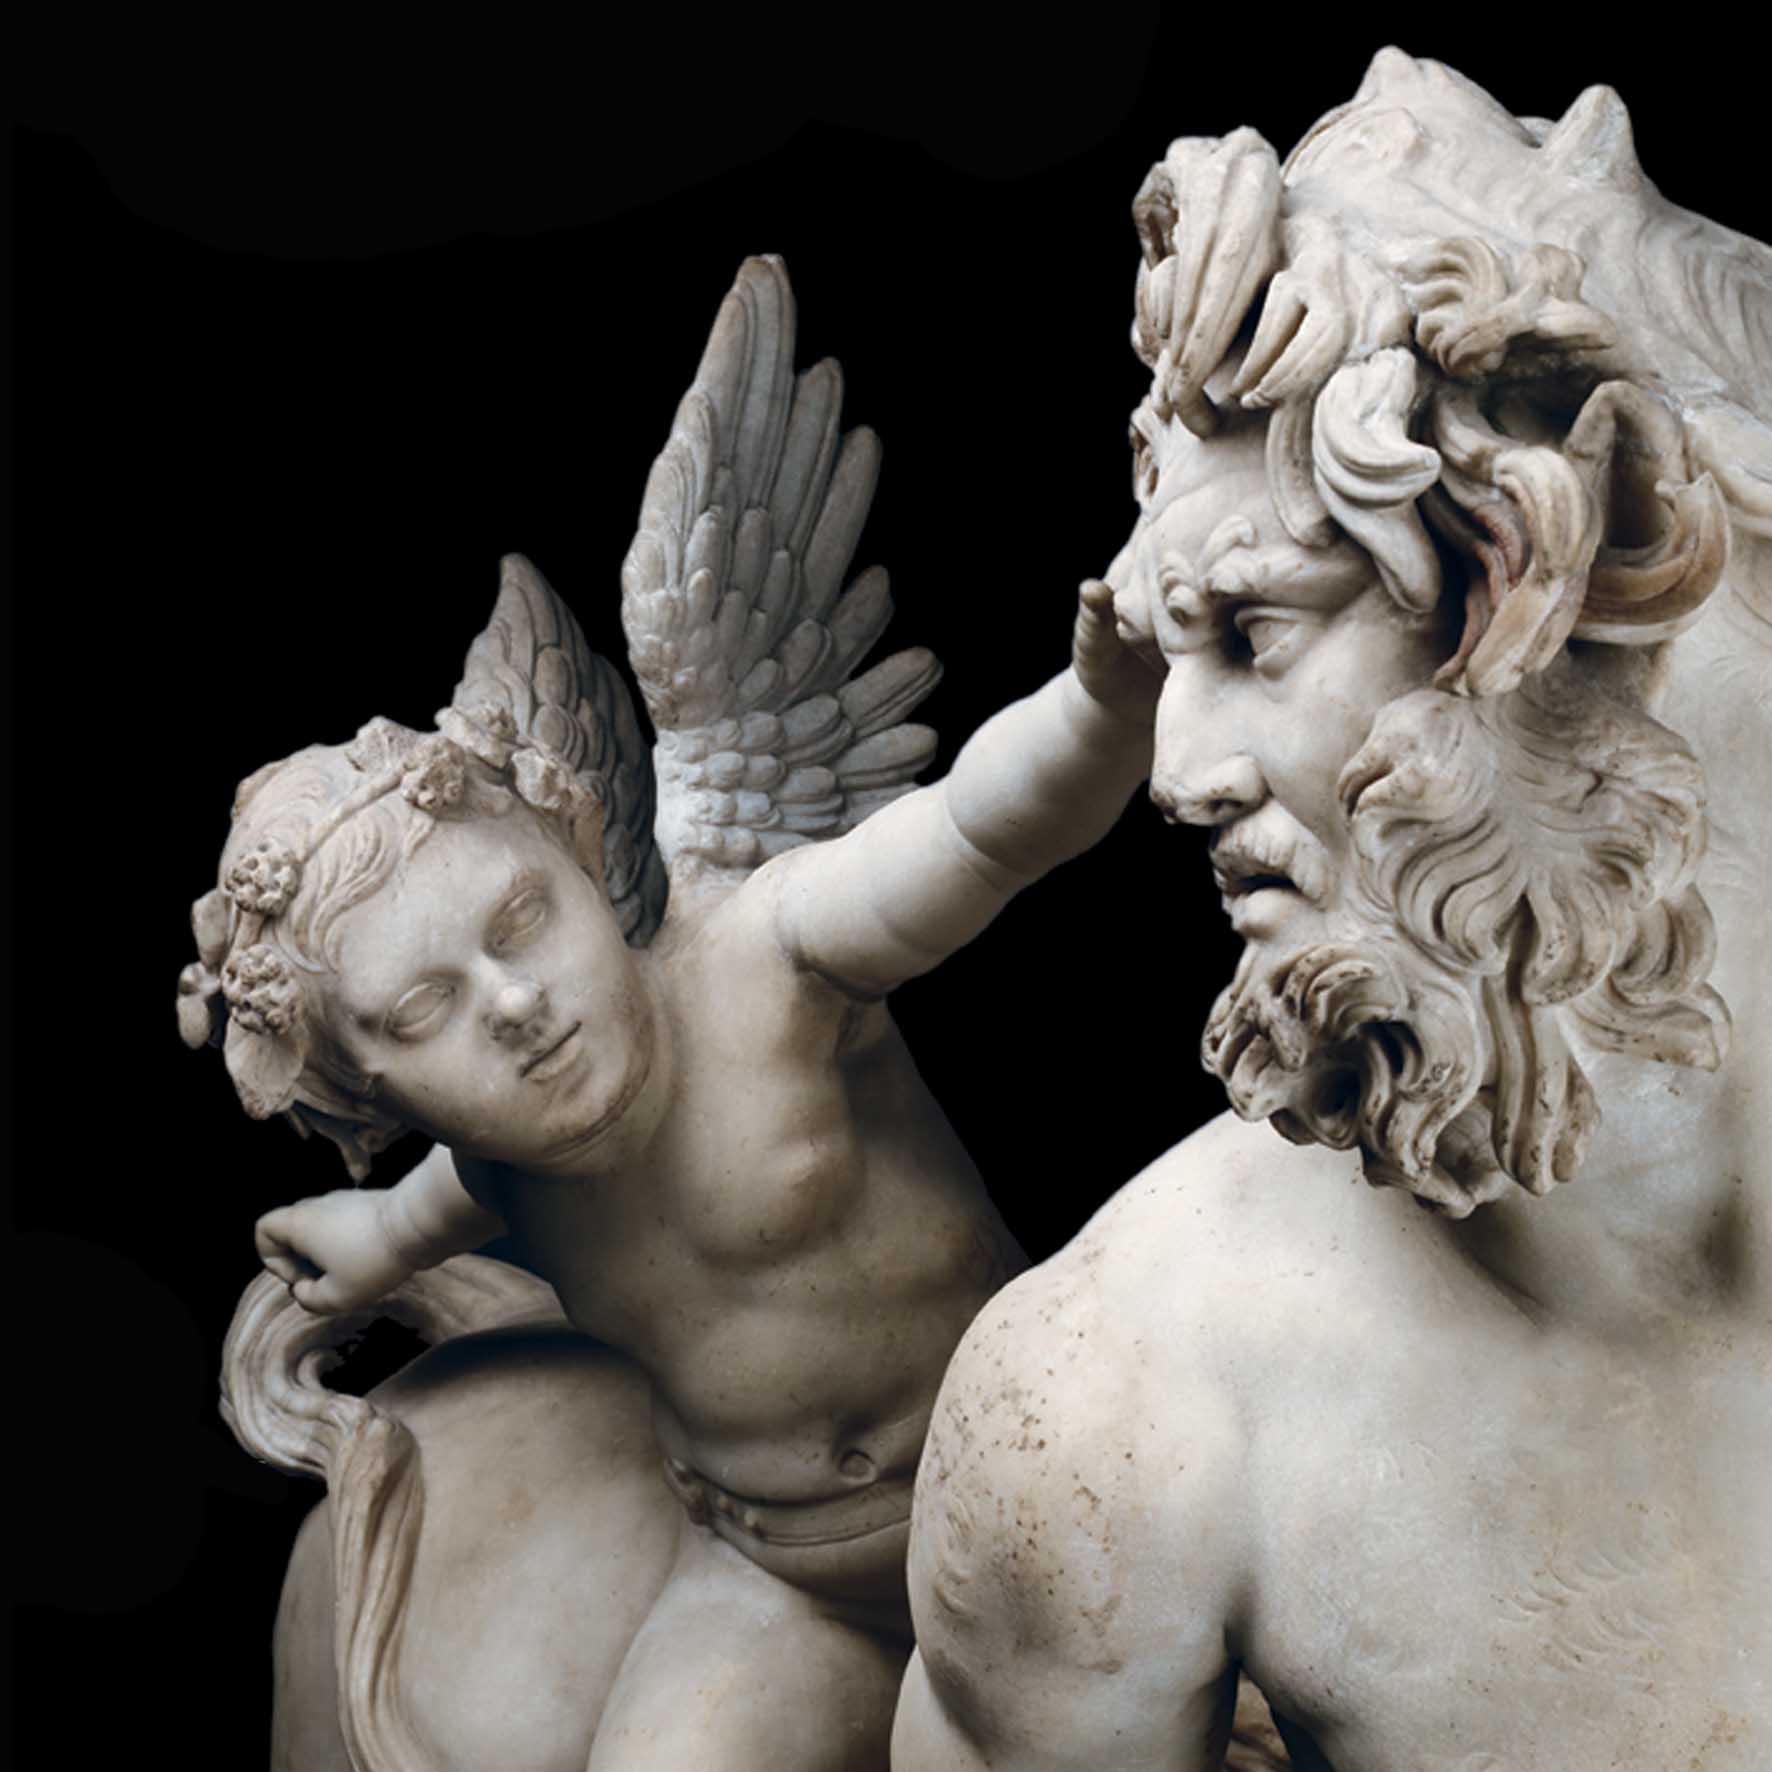 The Borghese Antiquities